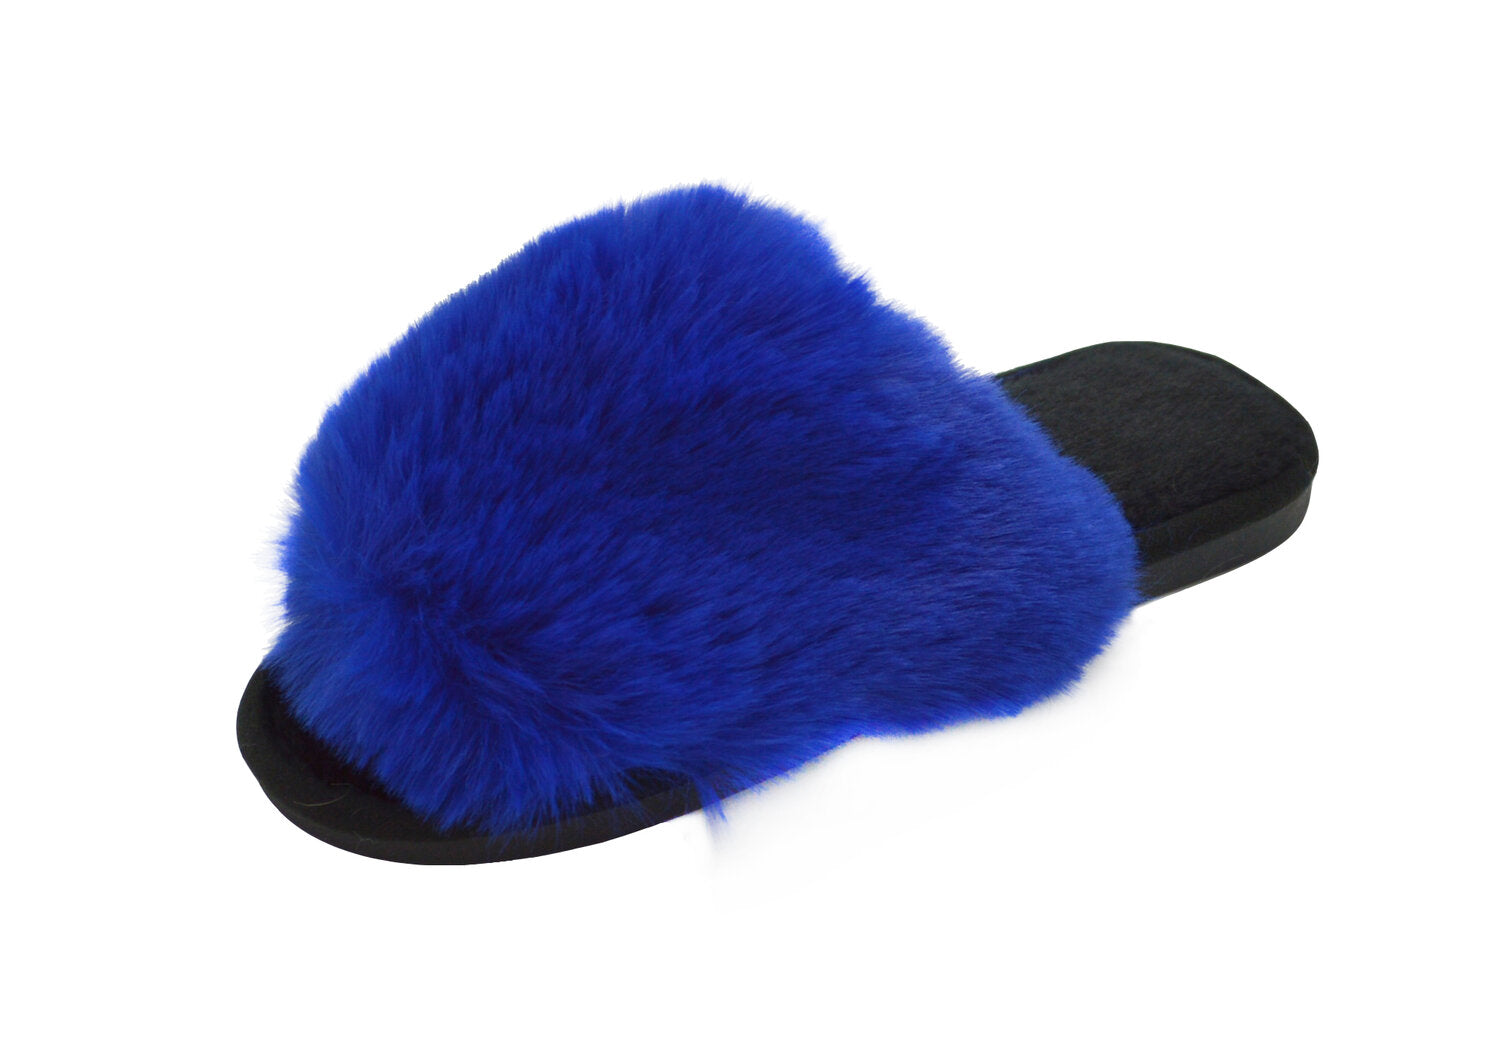 Wholesale Women's Slippers Winter Assorted Mix Brynlee NGK8